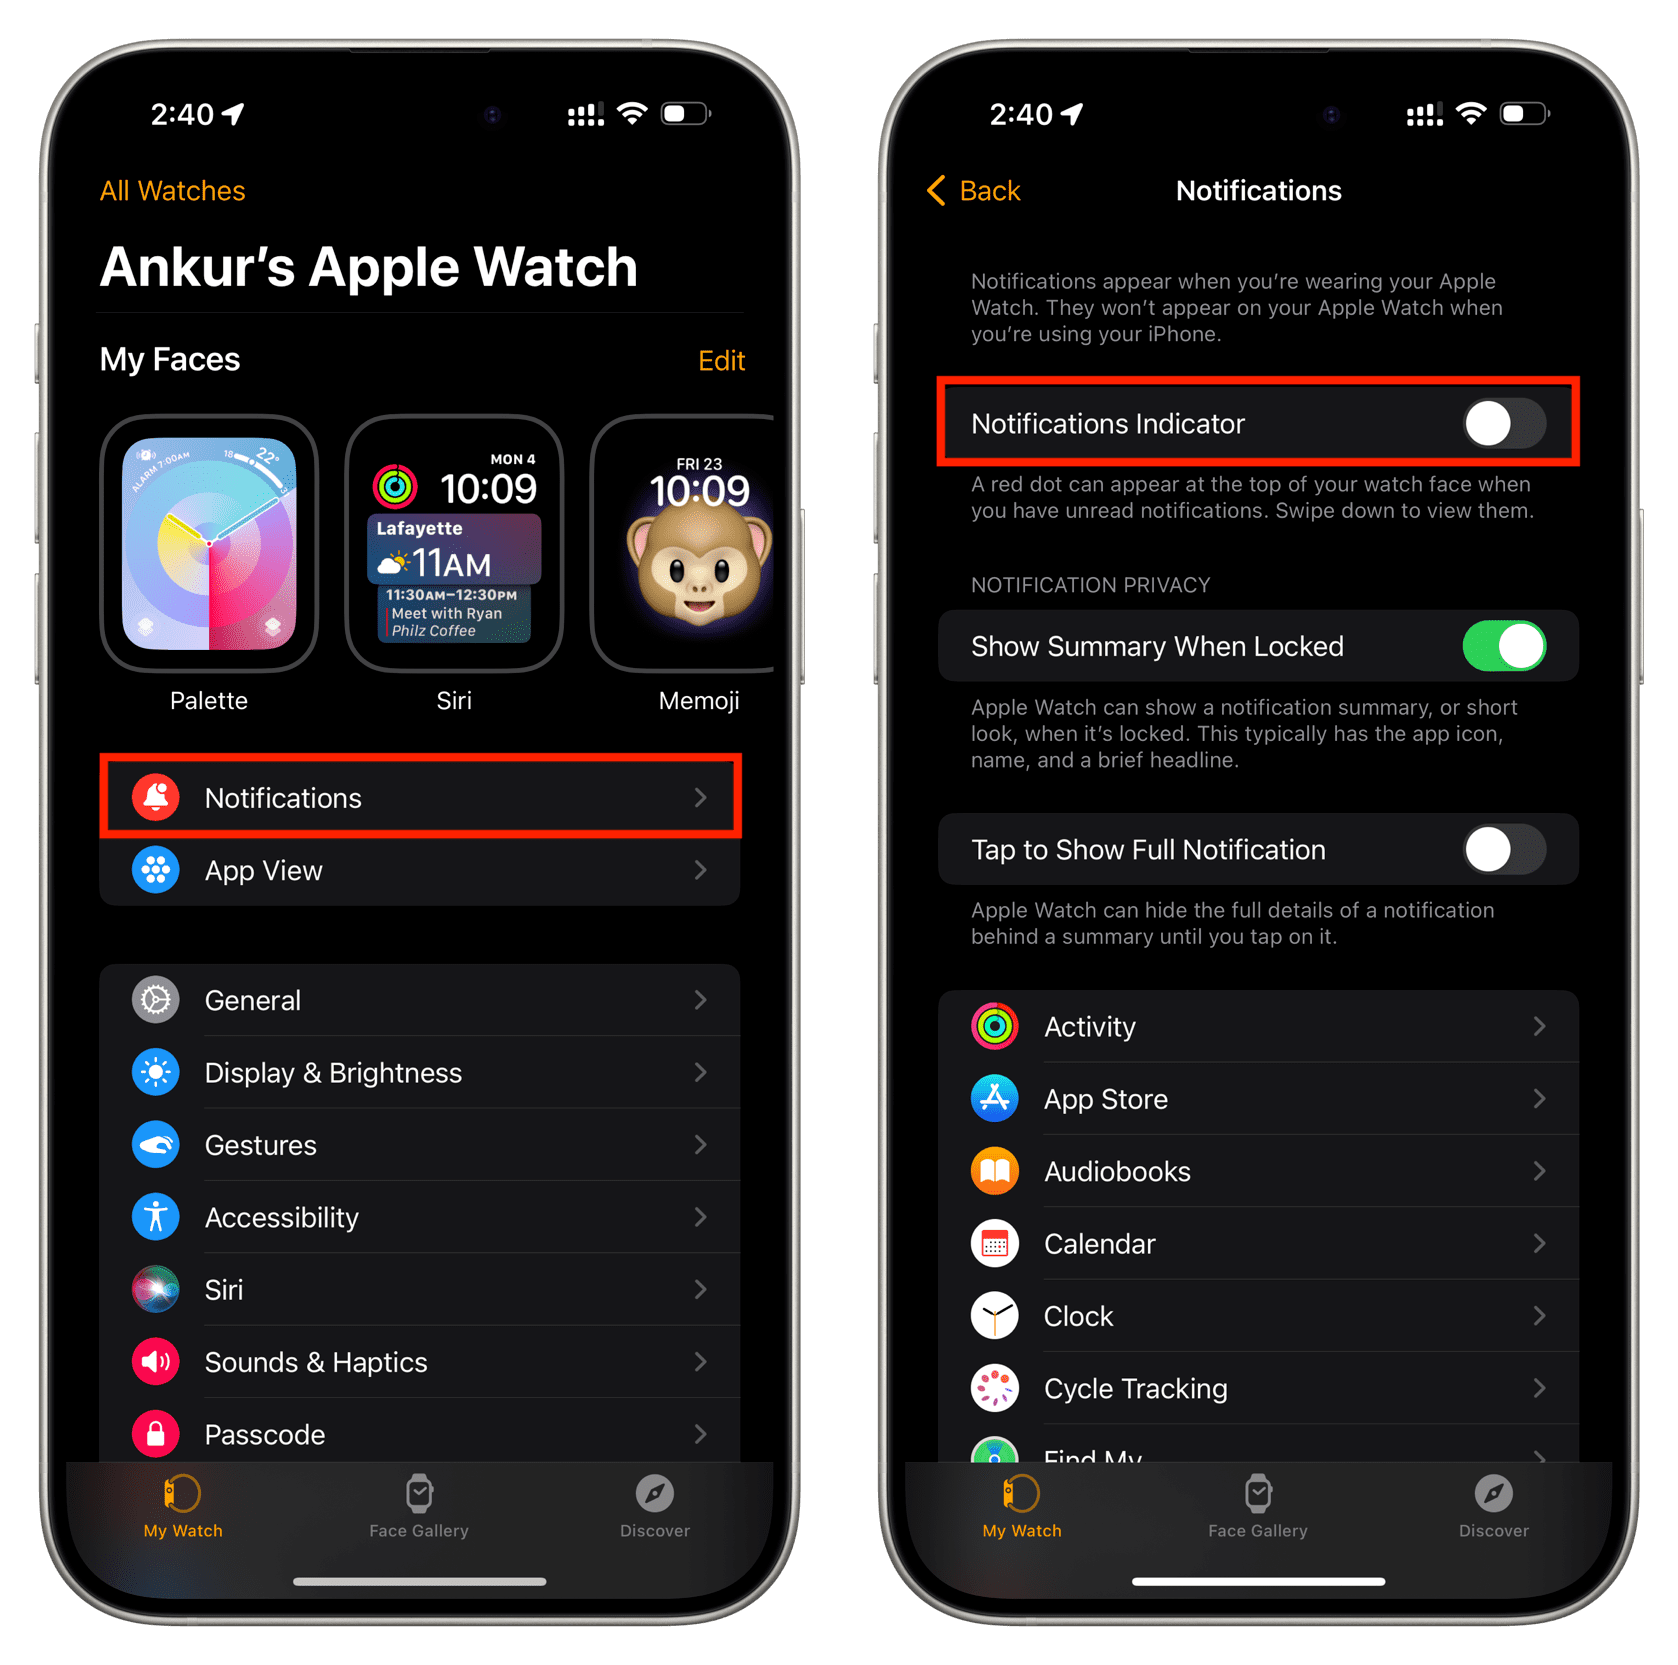 Turn off Notifications Indicator in Watch app on iPhone